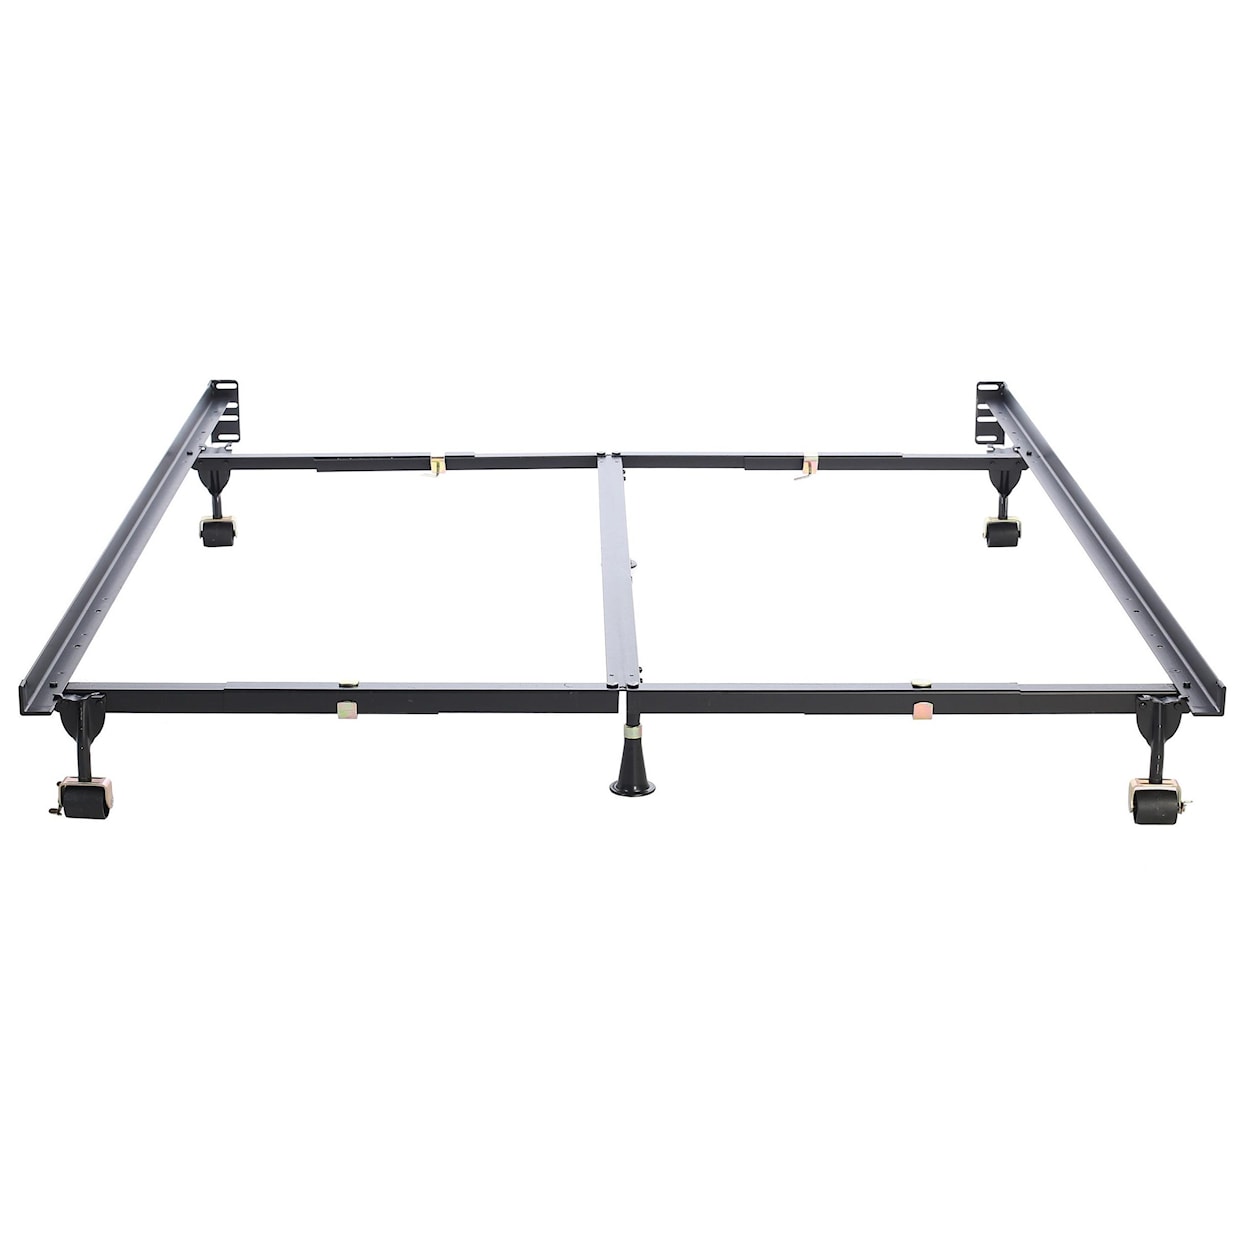 Hollywood Bed Frame Company Universal Clamp Bed Frame